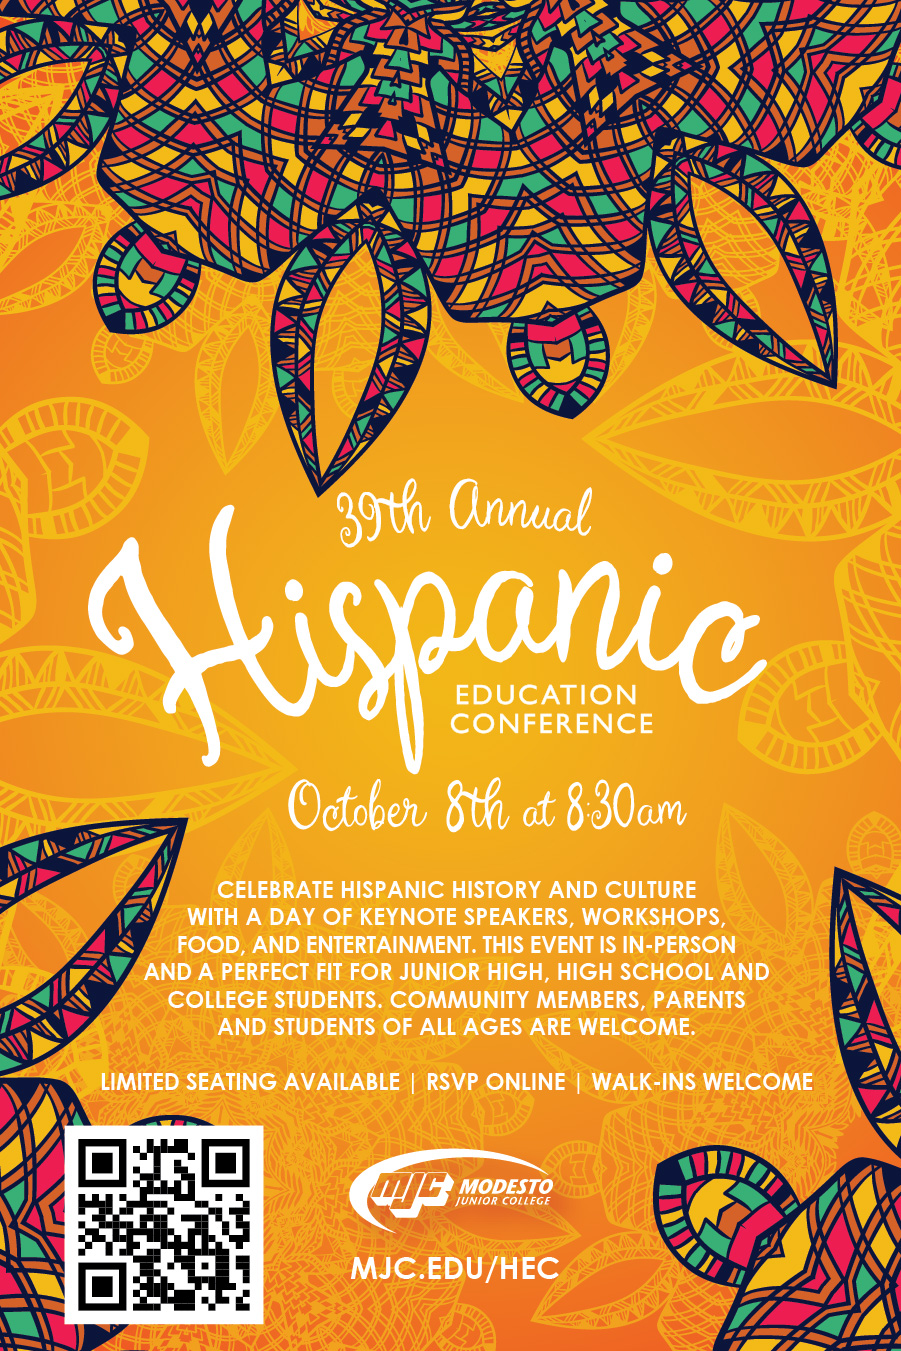 2022 Hispanic Education Conference Flyer Thumbnail. Click to open image.